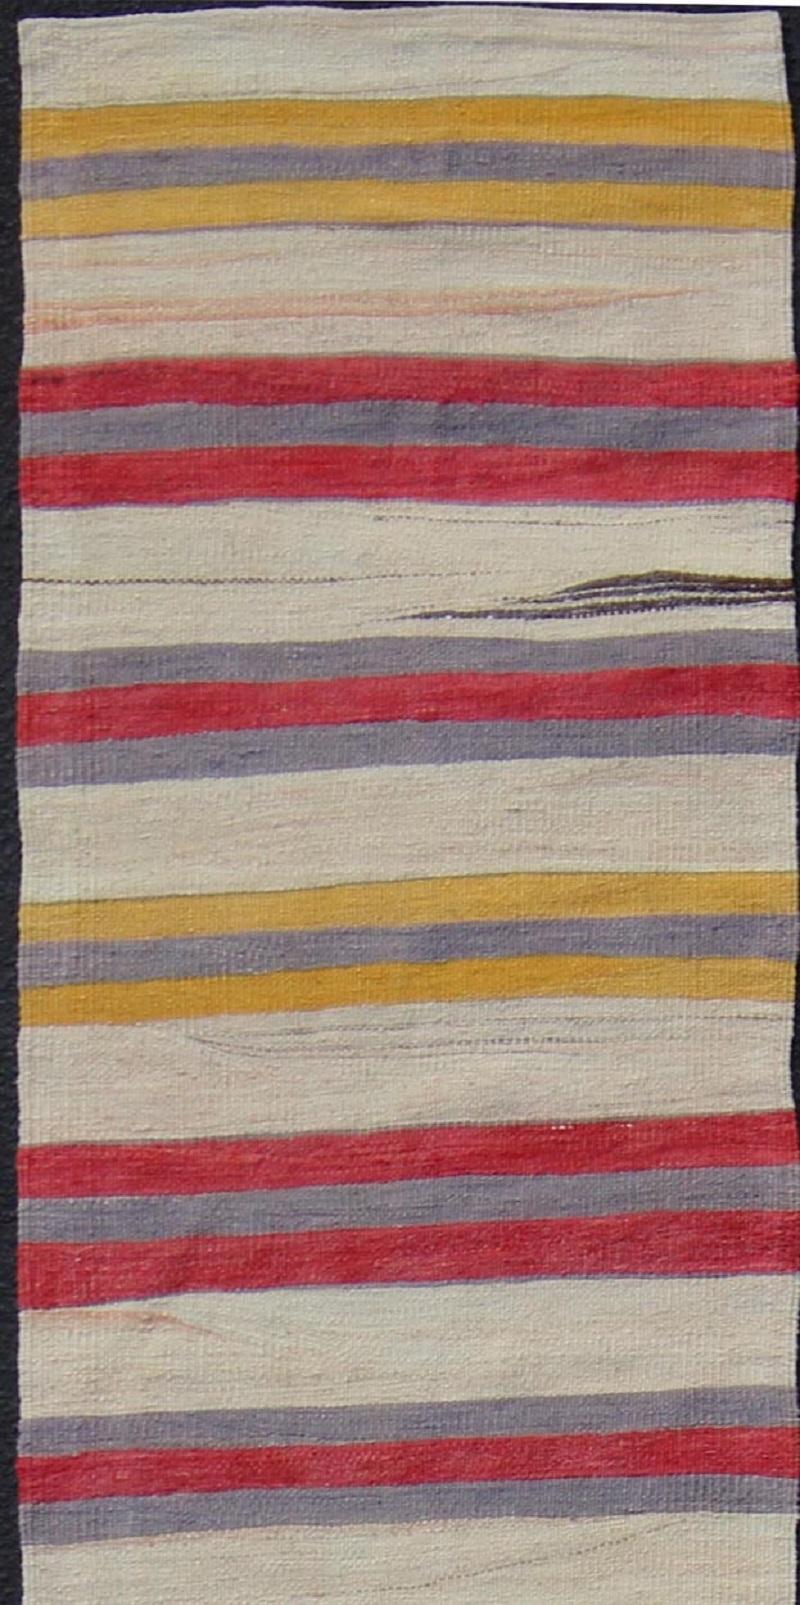 Hand-Woven Very Long Colorful Vintage Turkish Flat-Weave Runner with Dynamic Stripe Design For Sale